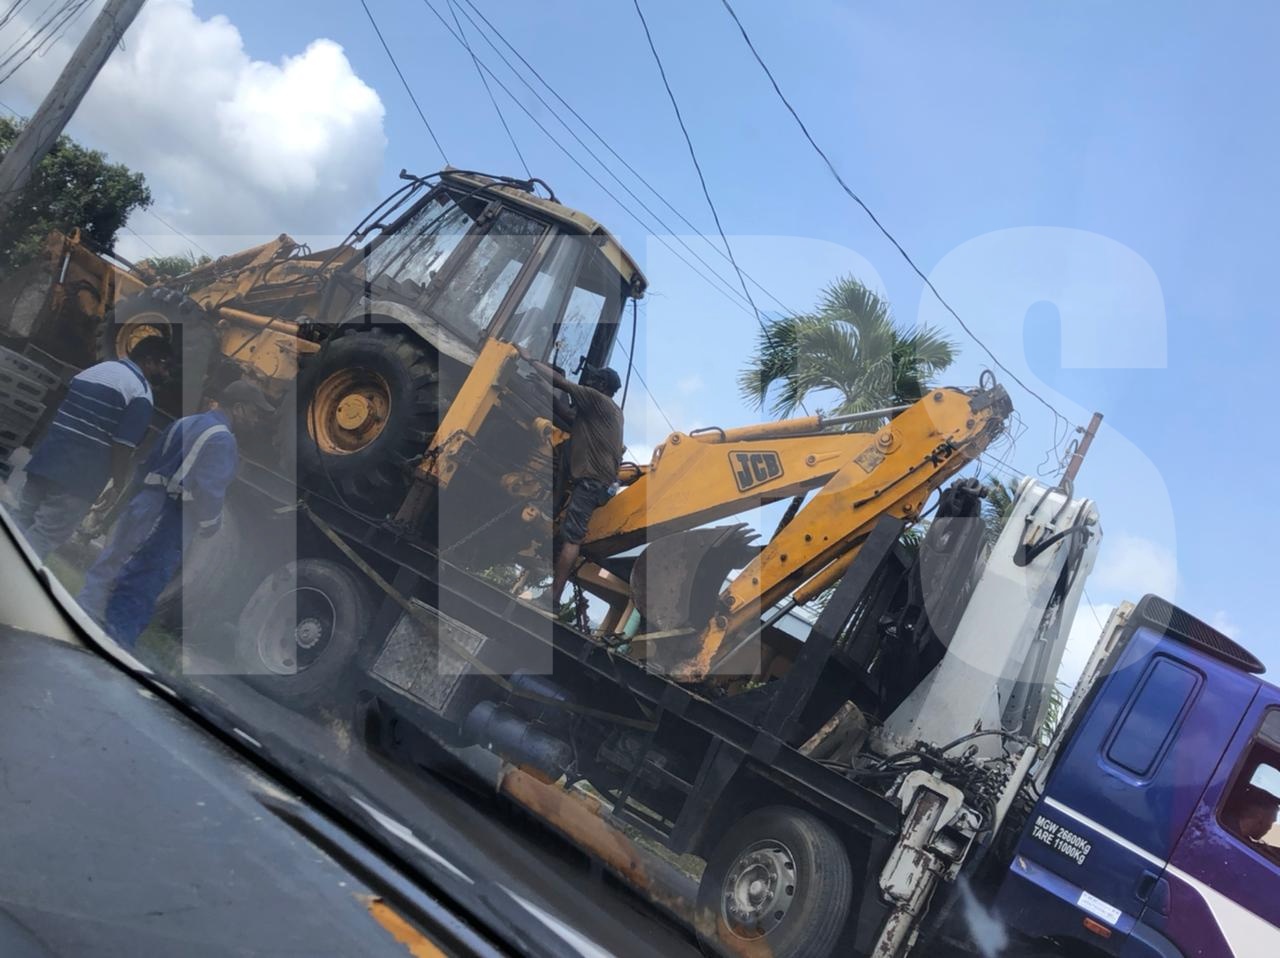 Stolen backhoe and getaway car recovered by cops